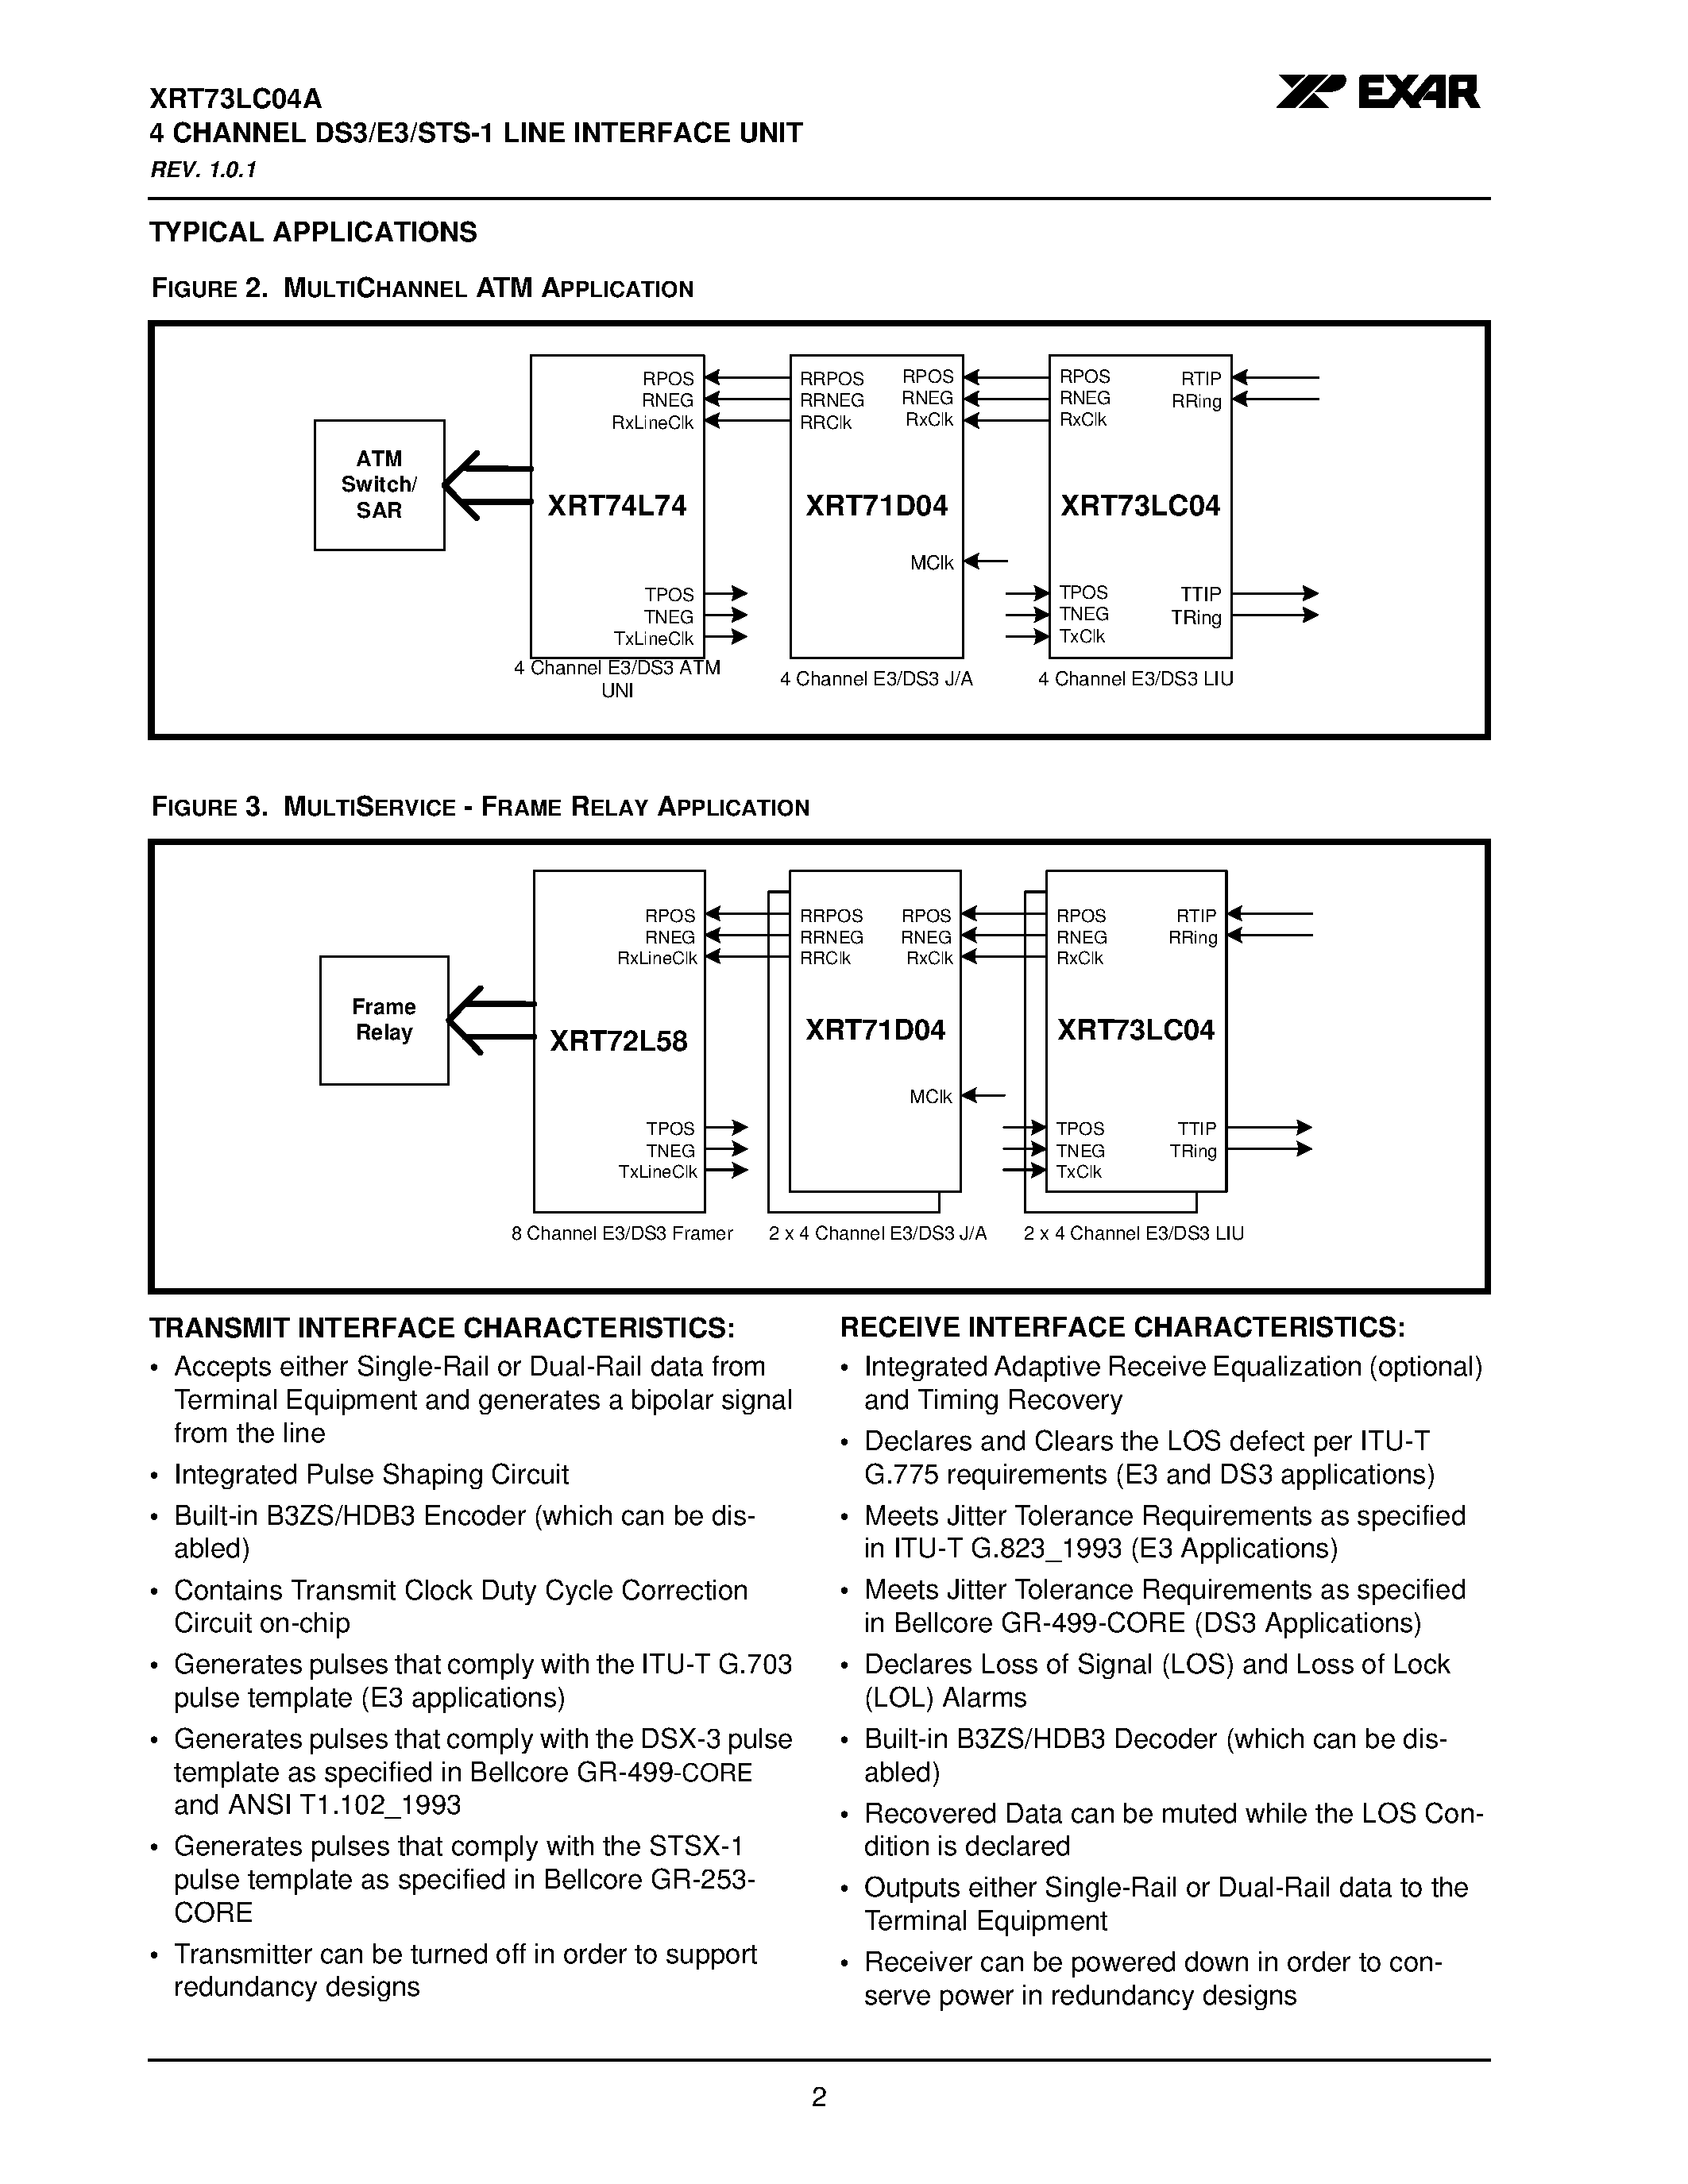 Datasheet XRT73LC04A - 4 CHANNEL DS3/E3/STS-1 LINE INTERFACE UNIT page 2